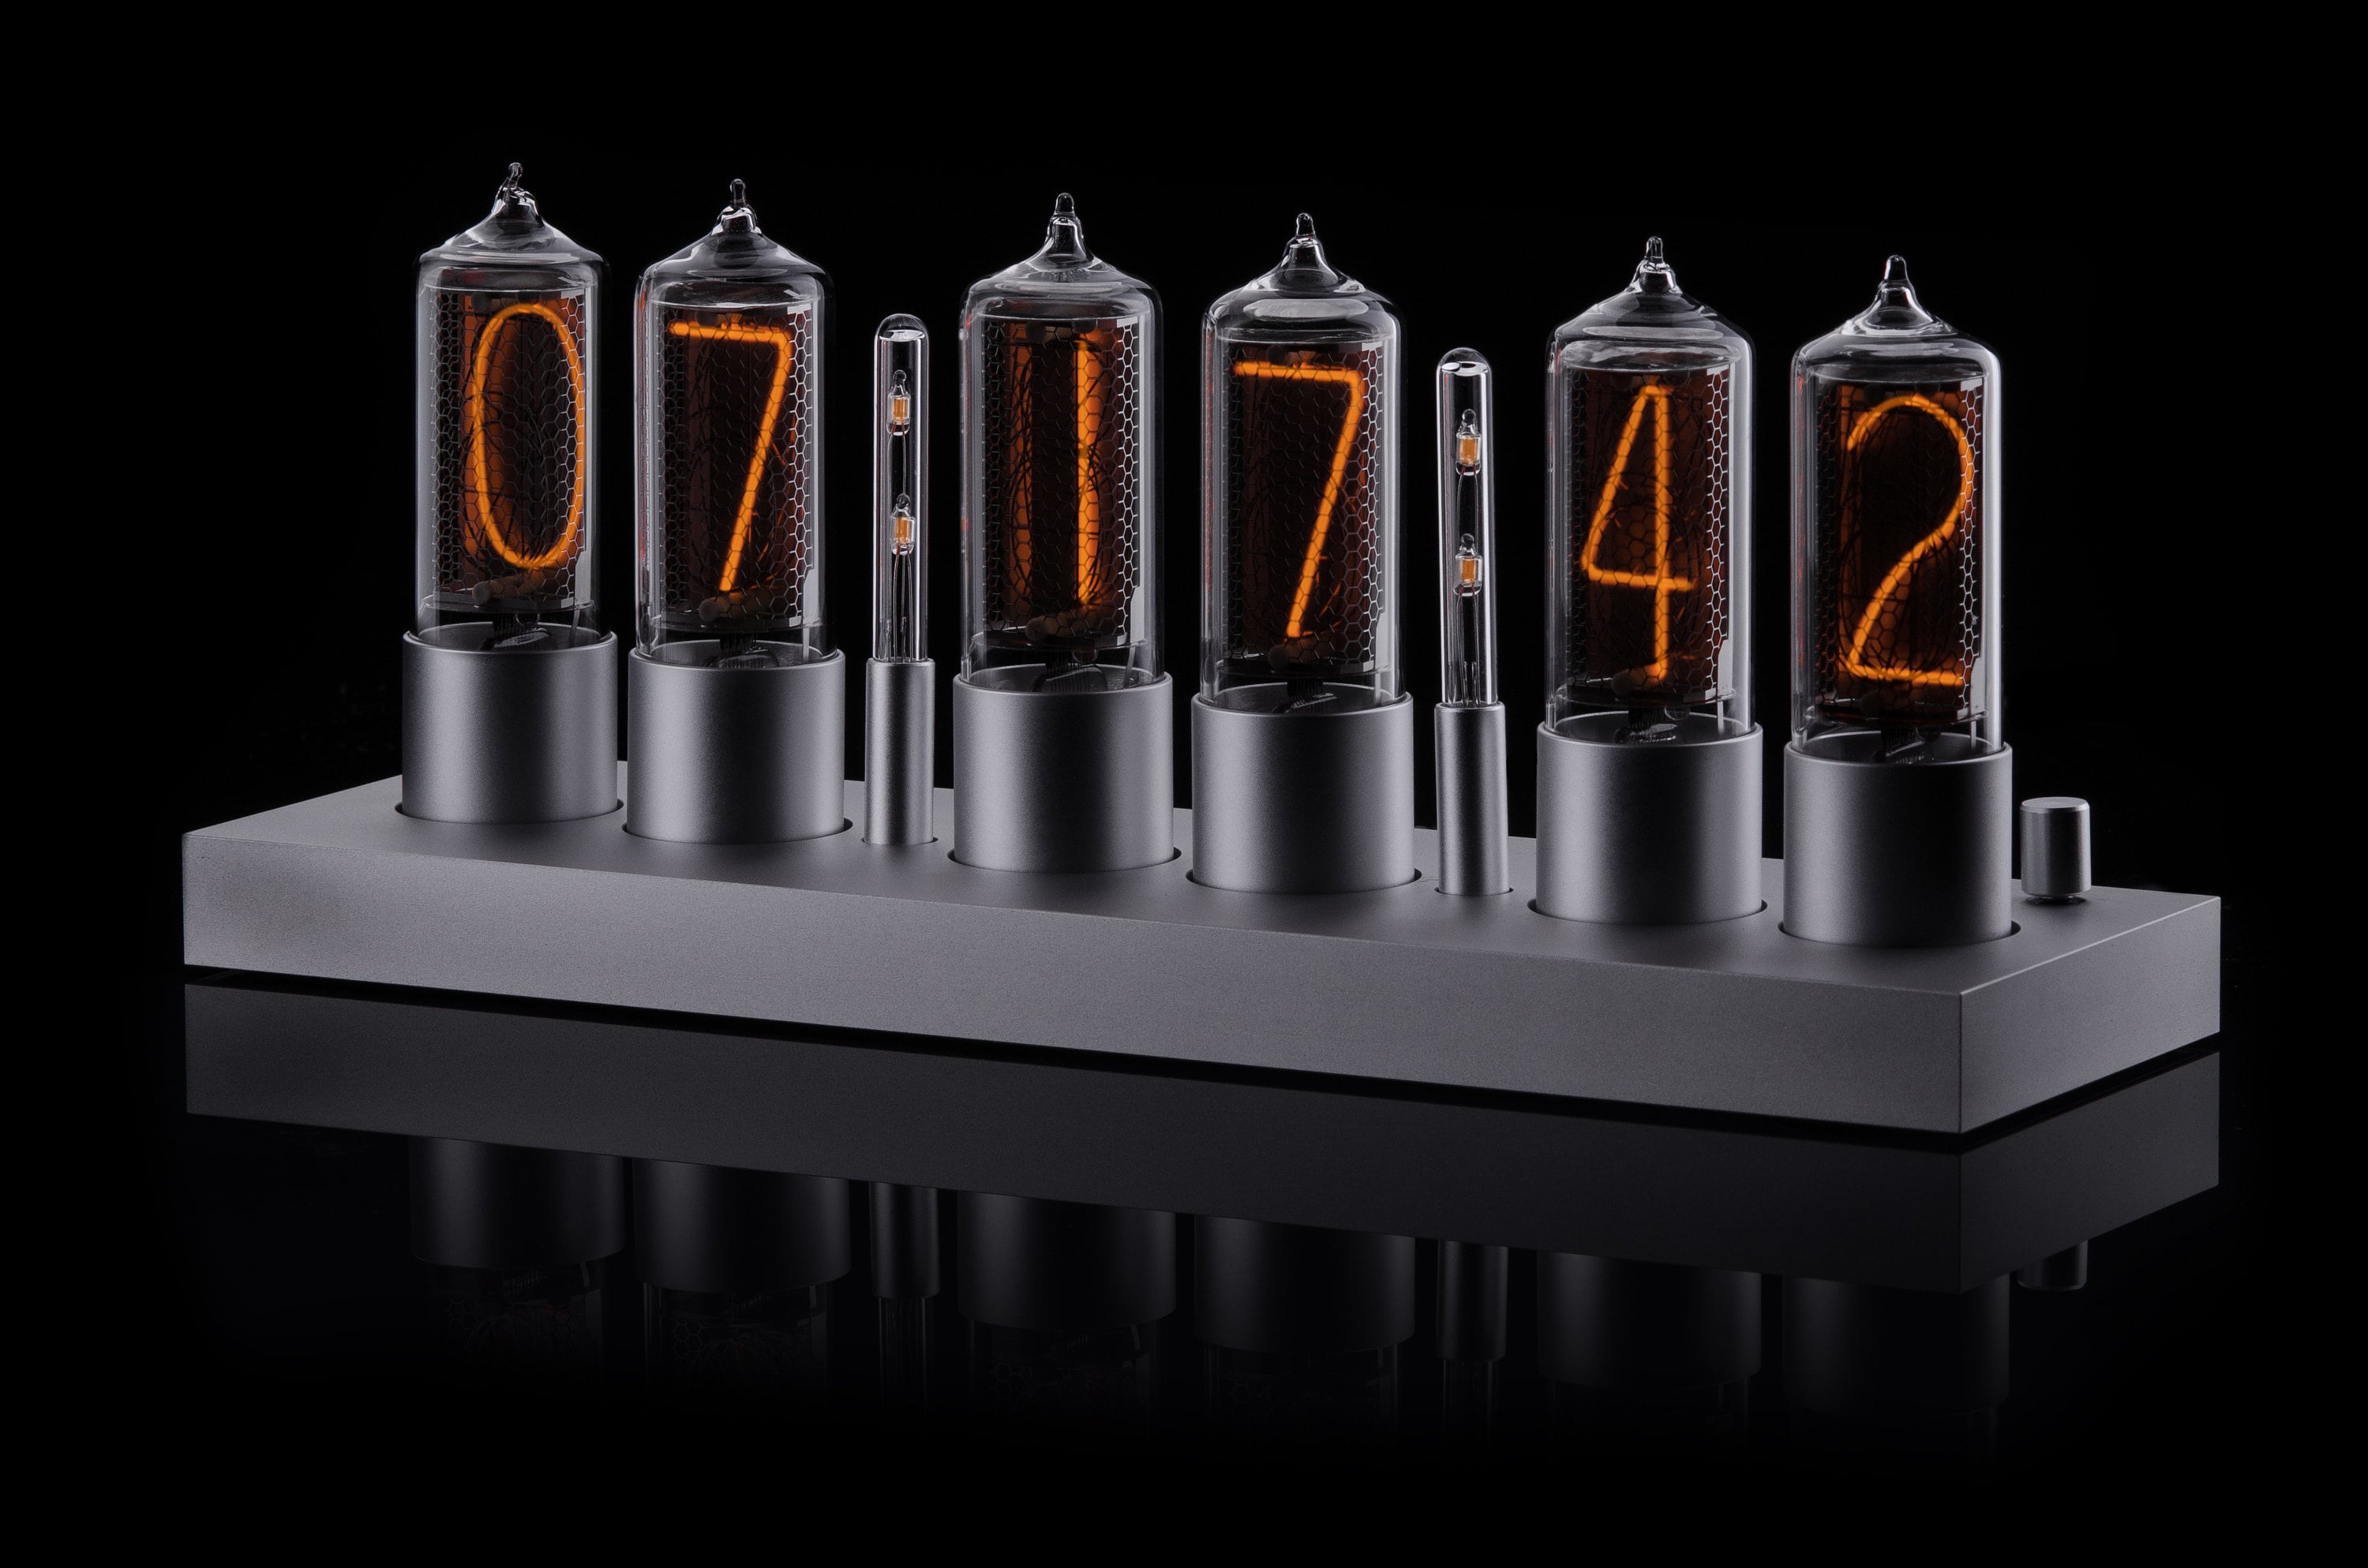 Very large Nixie Tube clock 6 IN-18 (NOS) in brushed steel case